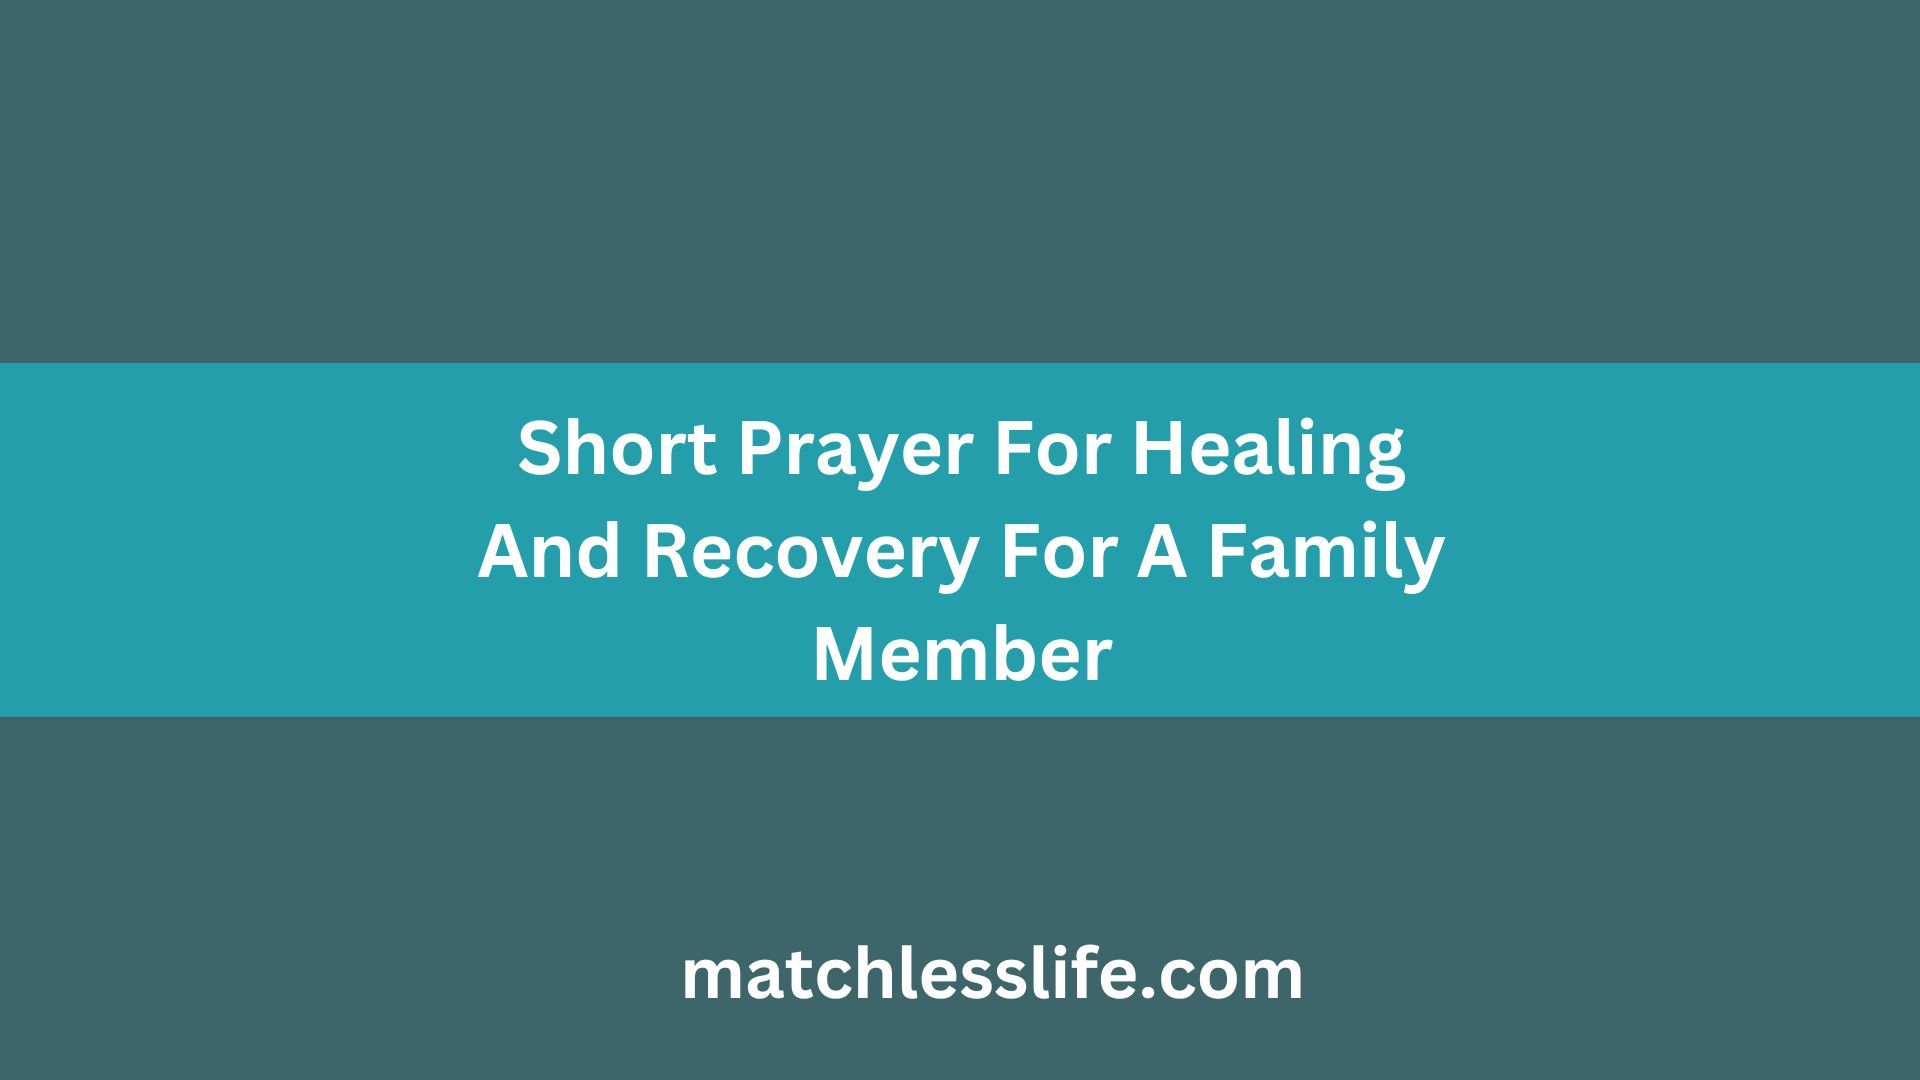 Short Prayer For Healing And Recovery For A Family Member